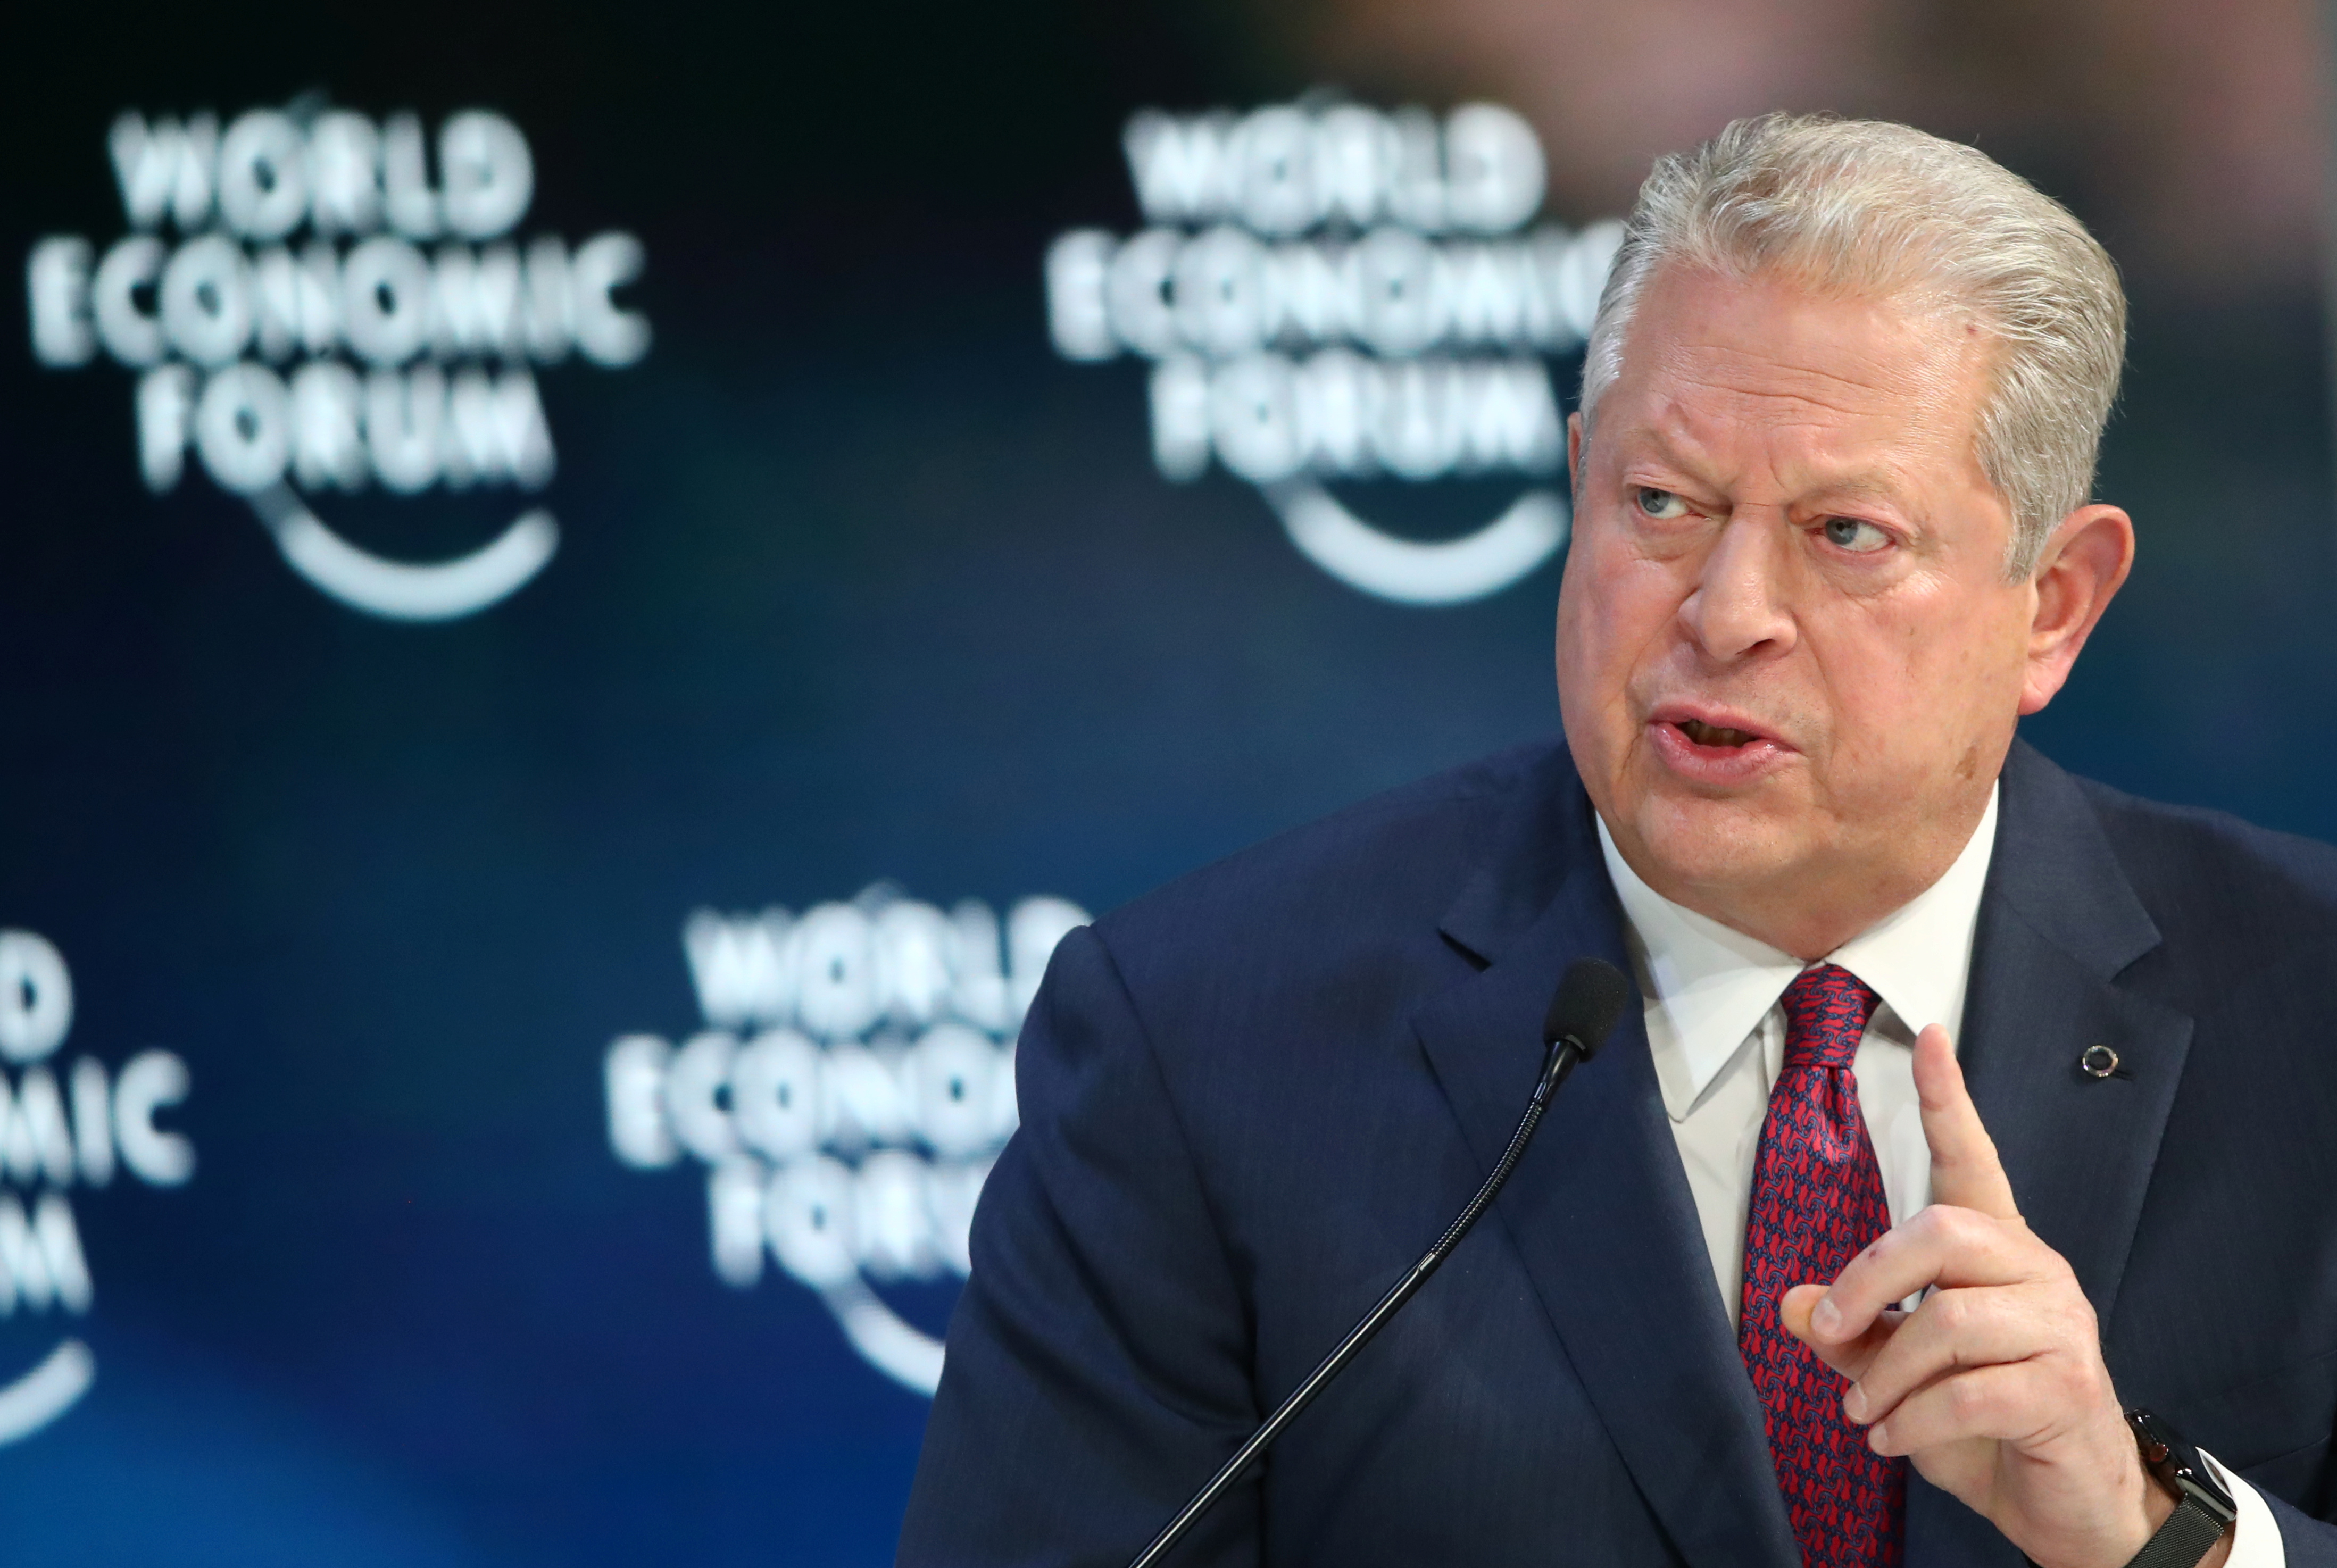 Former U.S. Vice-President Al Gore speaks during a session at the 50th World Economic Forum (WEF) annual meeting in Davos, Switzerland, January 22, 2020. REUTERS/Denis Balibouse